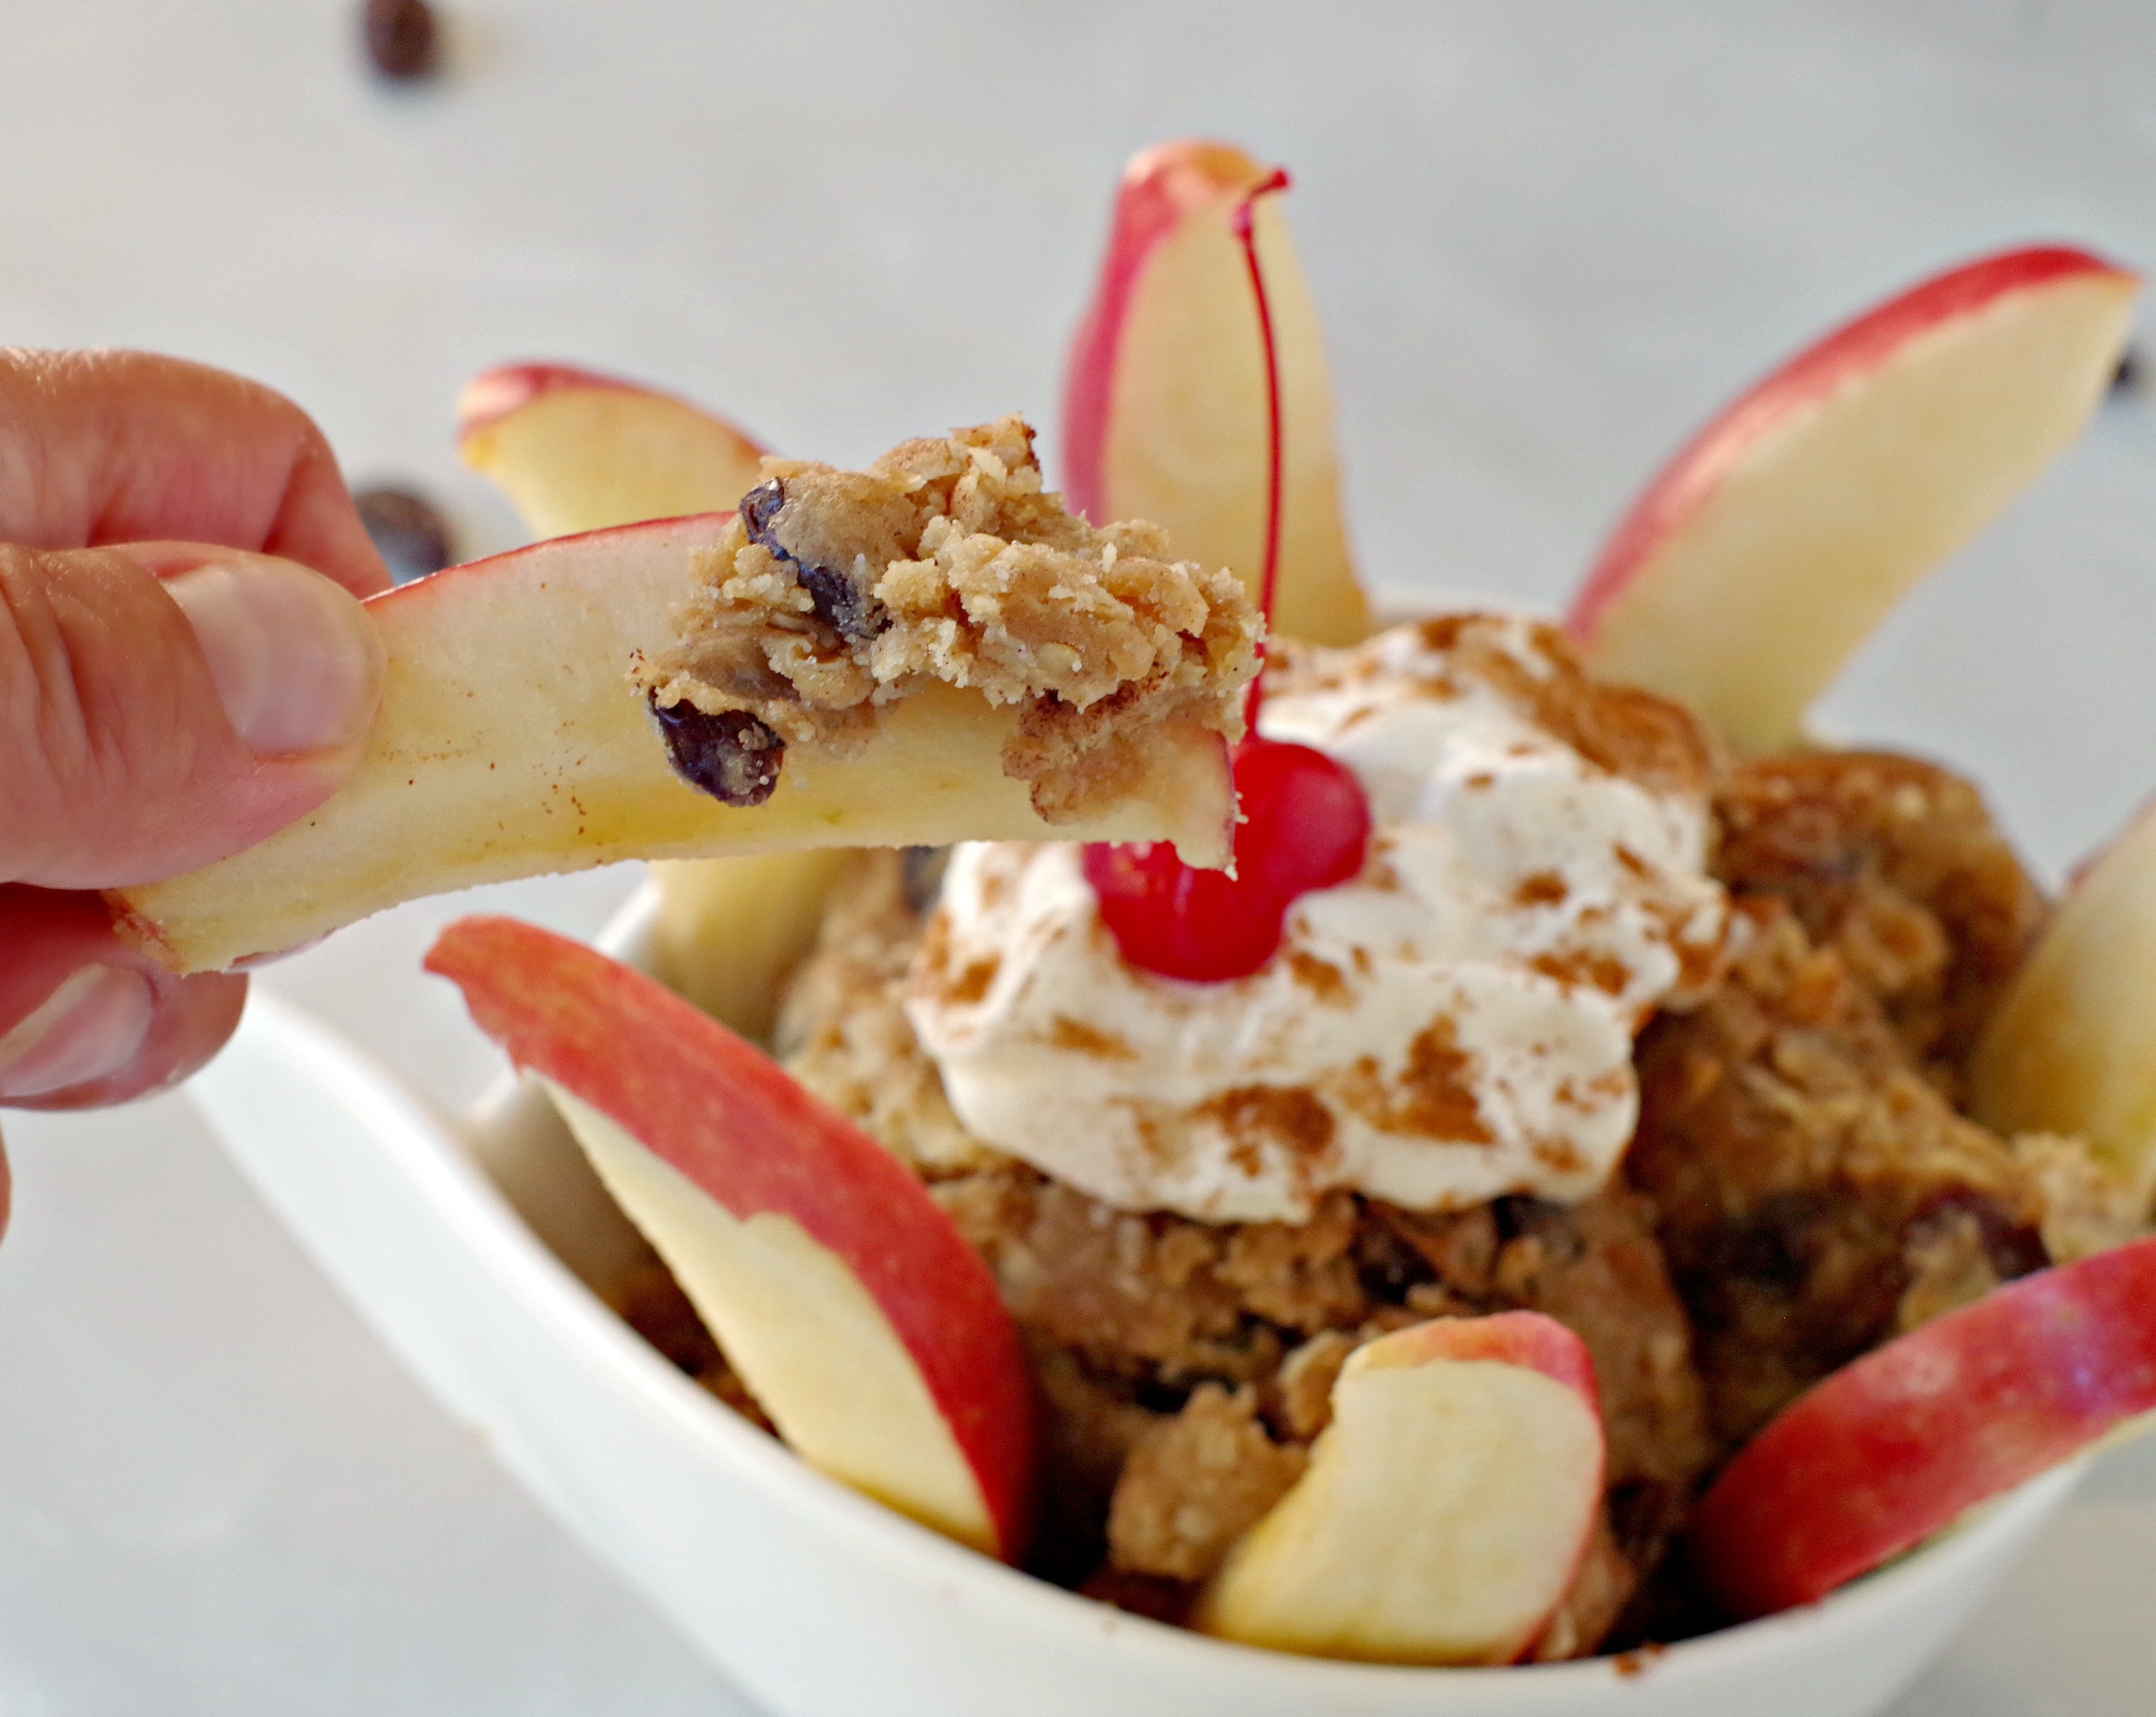 apple piece being dipped into edible oatmeal raisin cookie dip